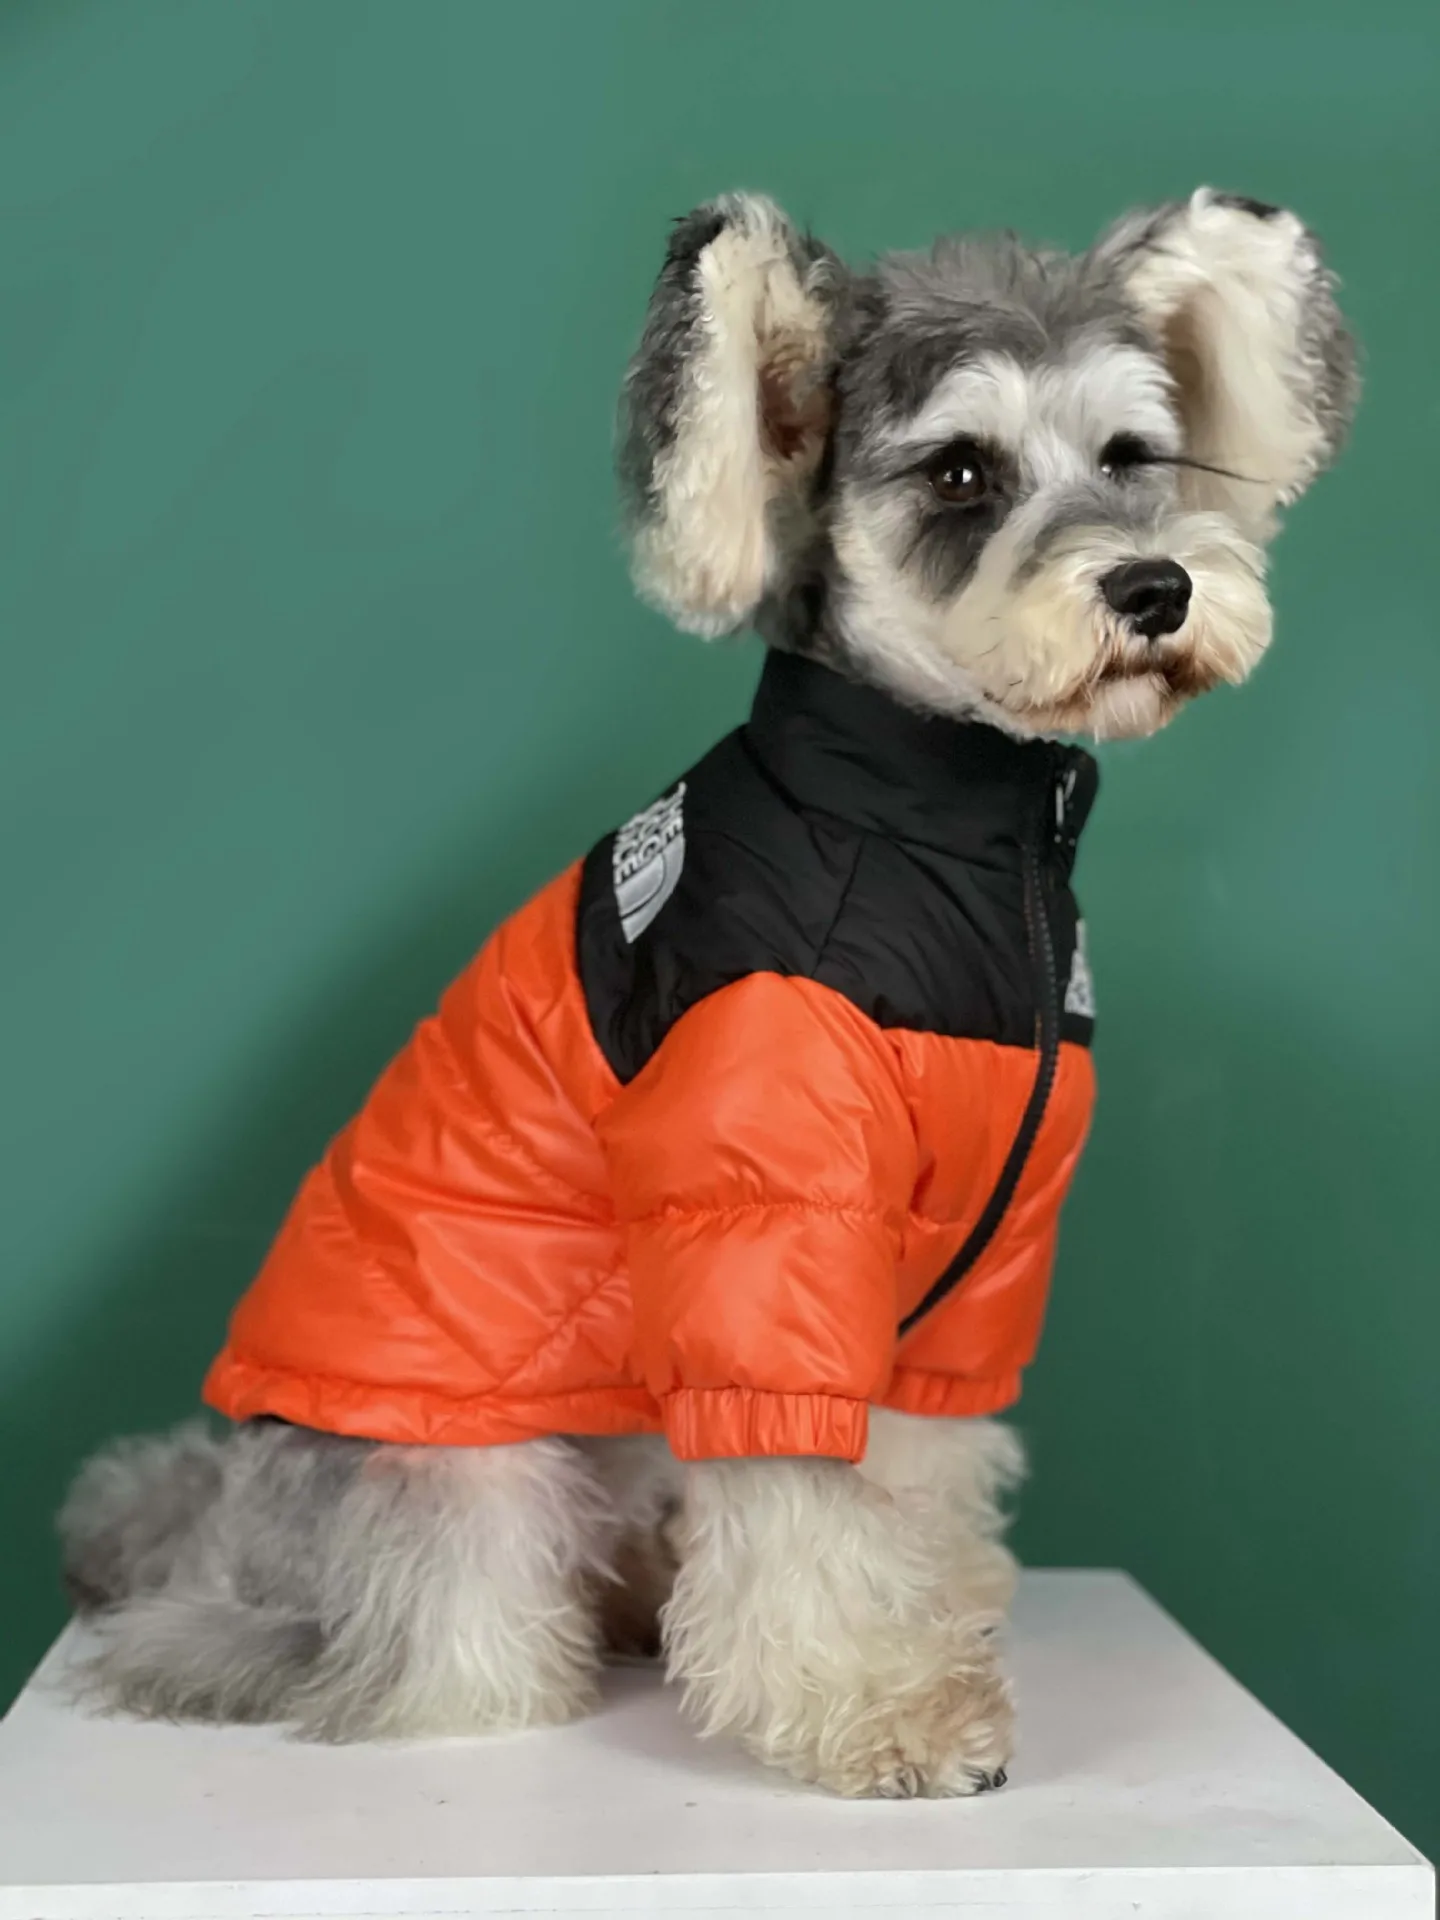 The Dog Face Winter Pet Dog Down Jacket Clothes Warm Thick Stitching ...